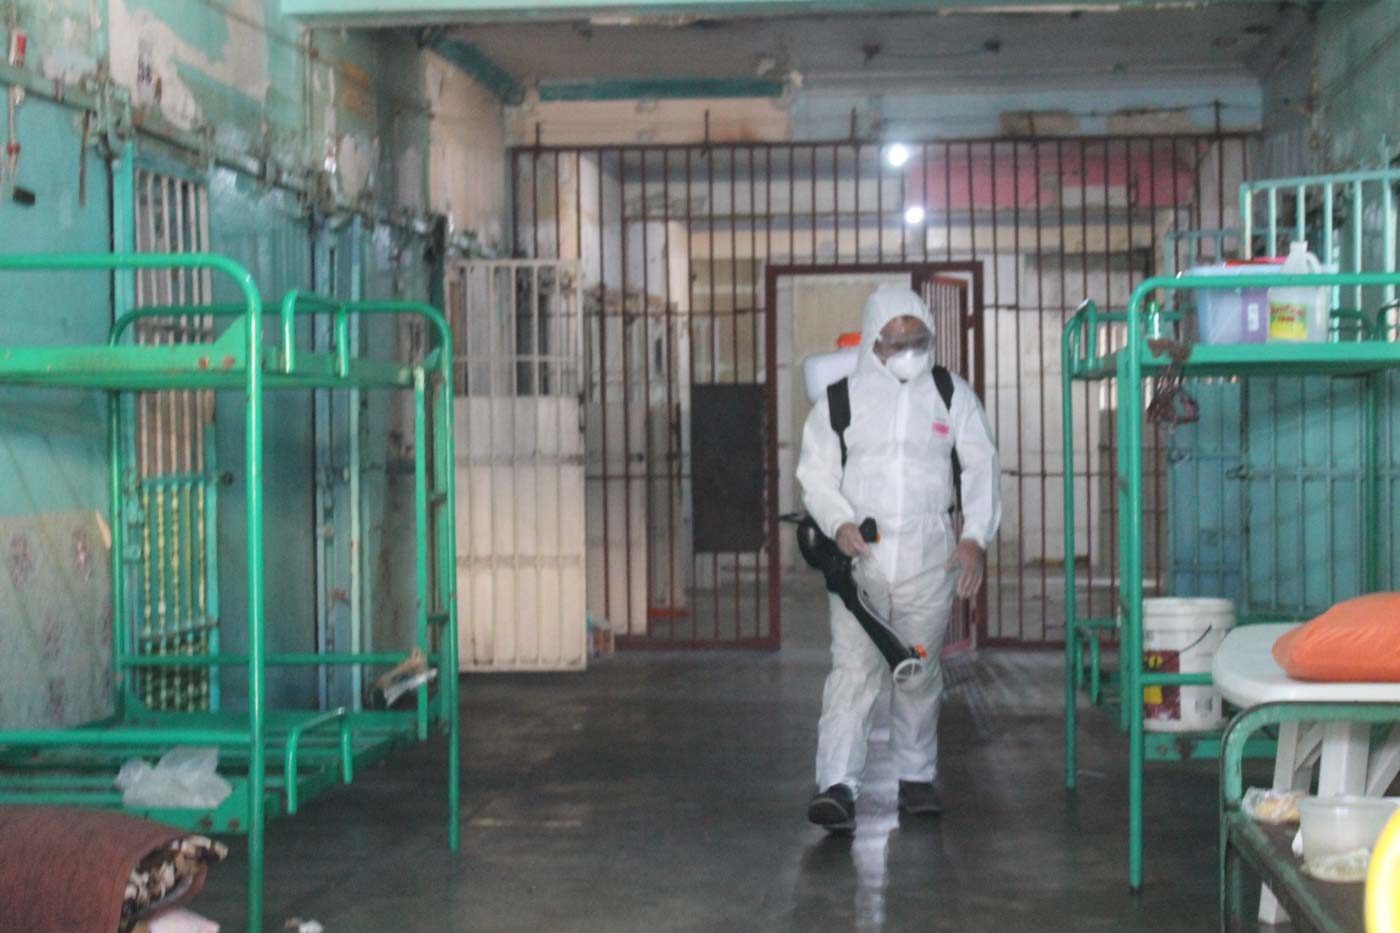 Second COVID-19 infection in Itogon another jail officer in Bilibid